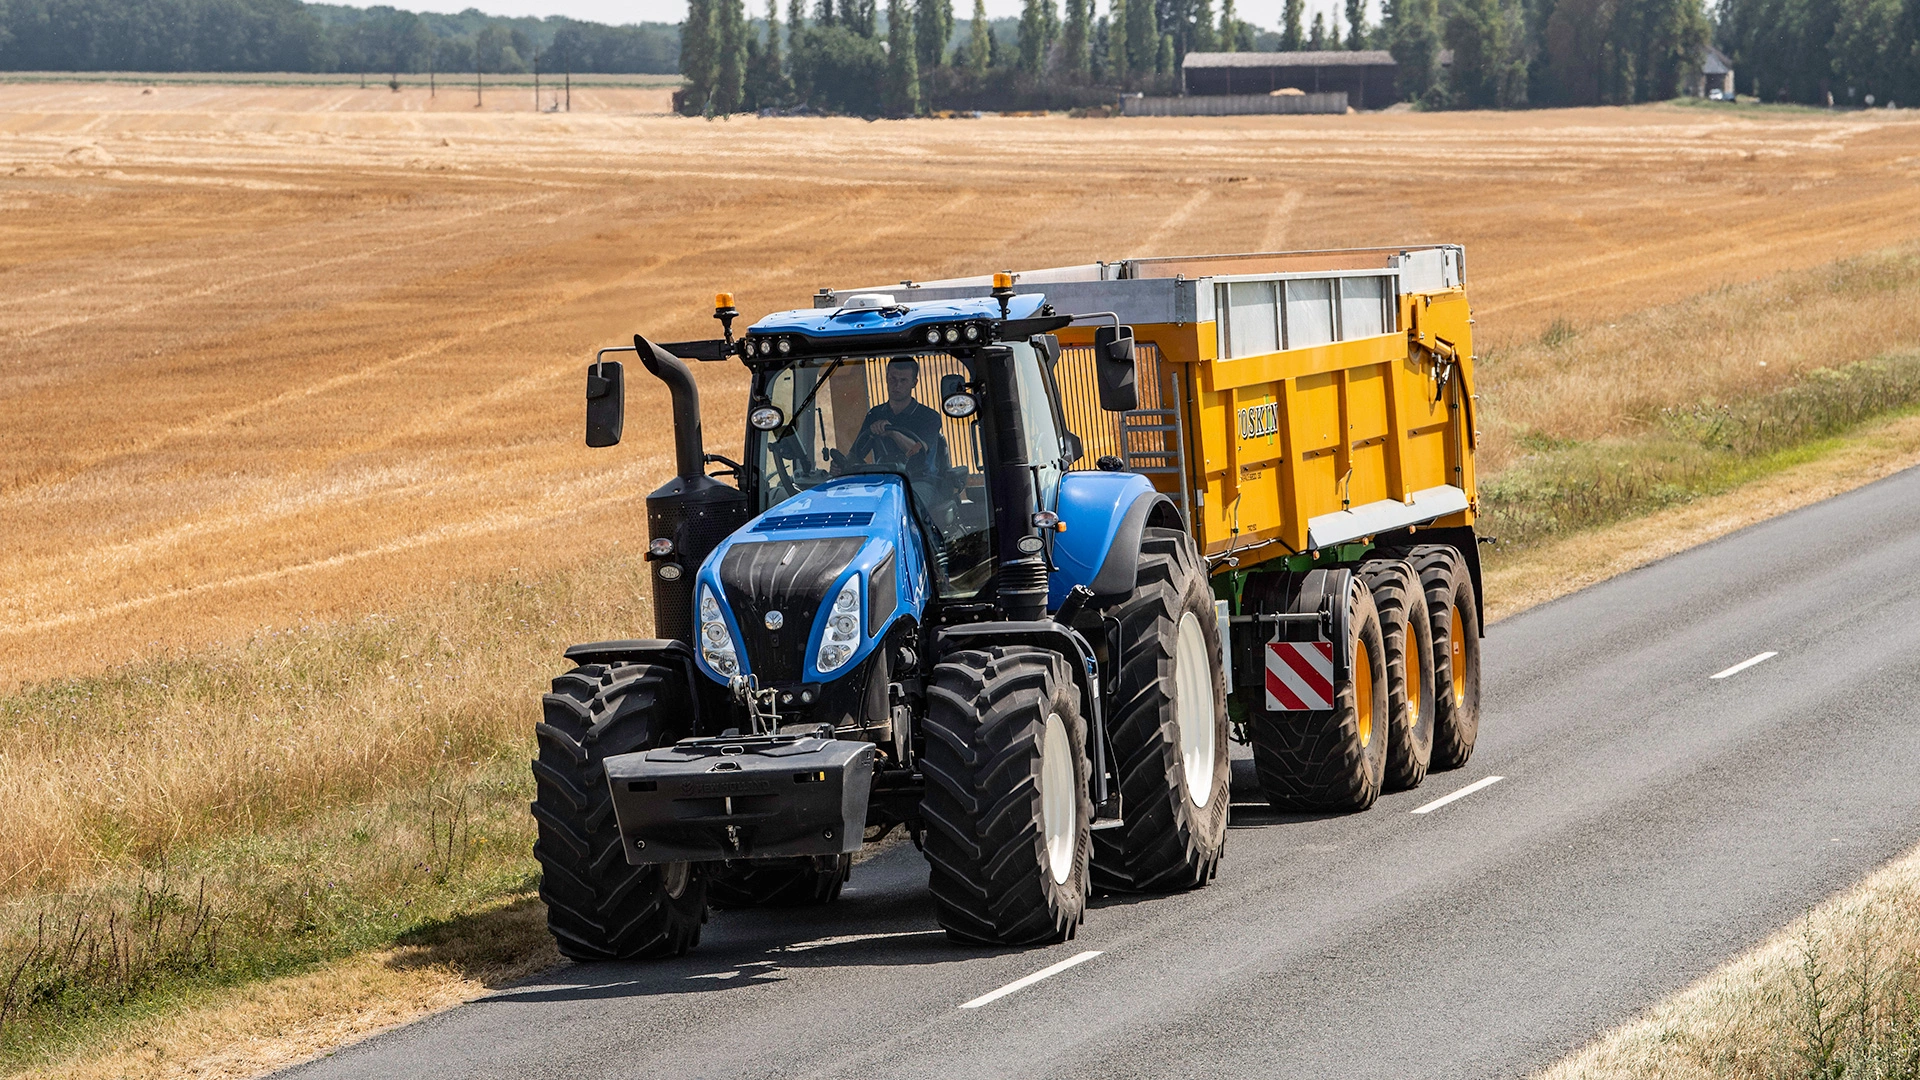 New Holland Tractor on road with trailer, golden field backdrop, driver visible in cab.